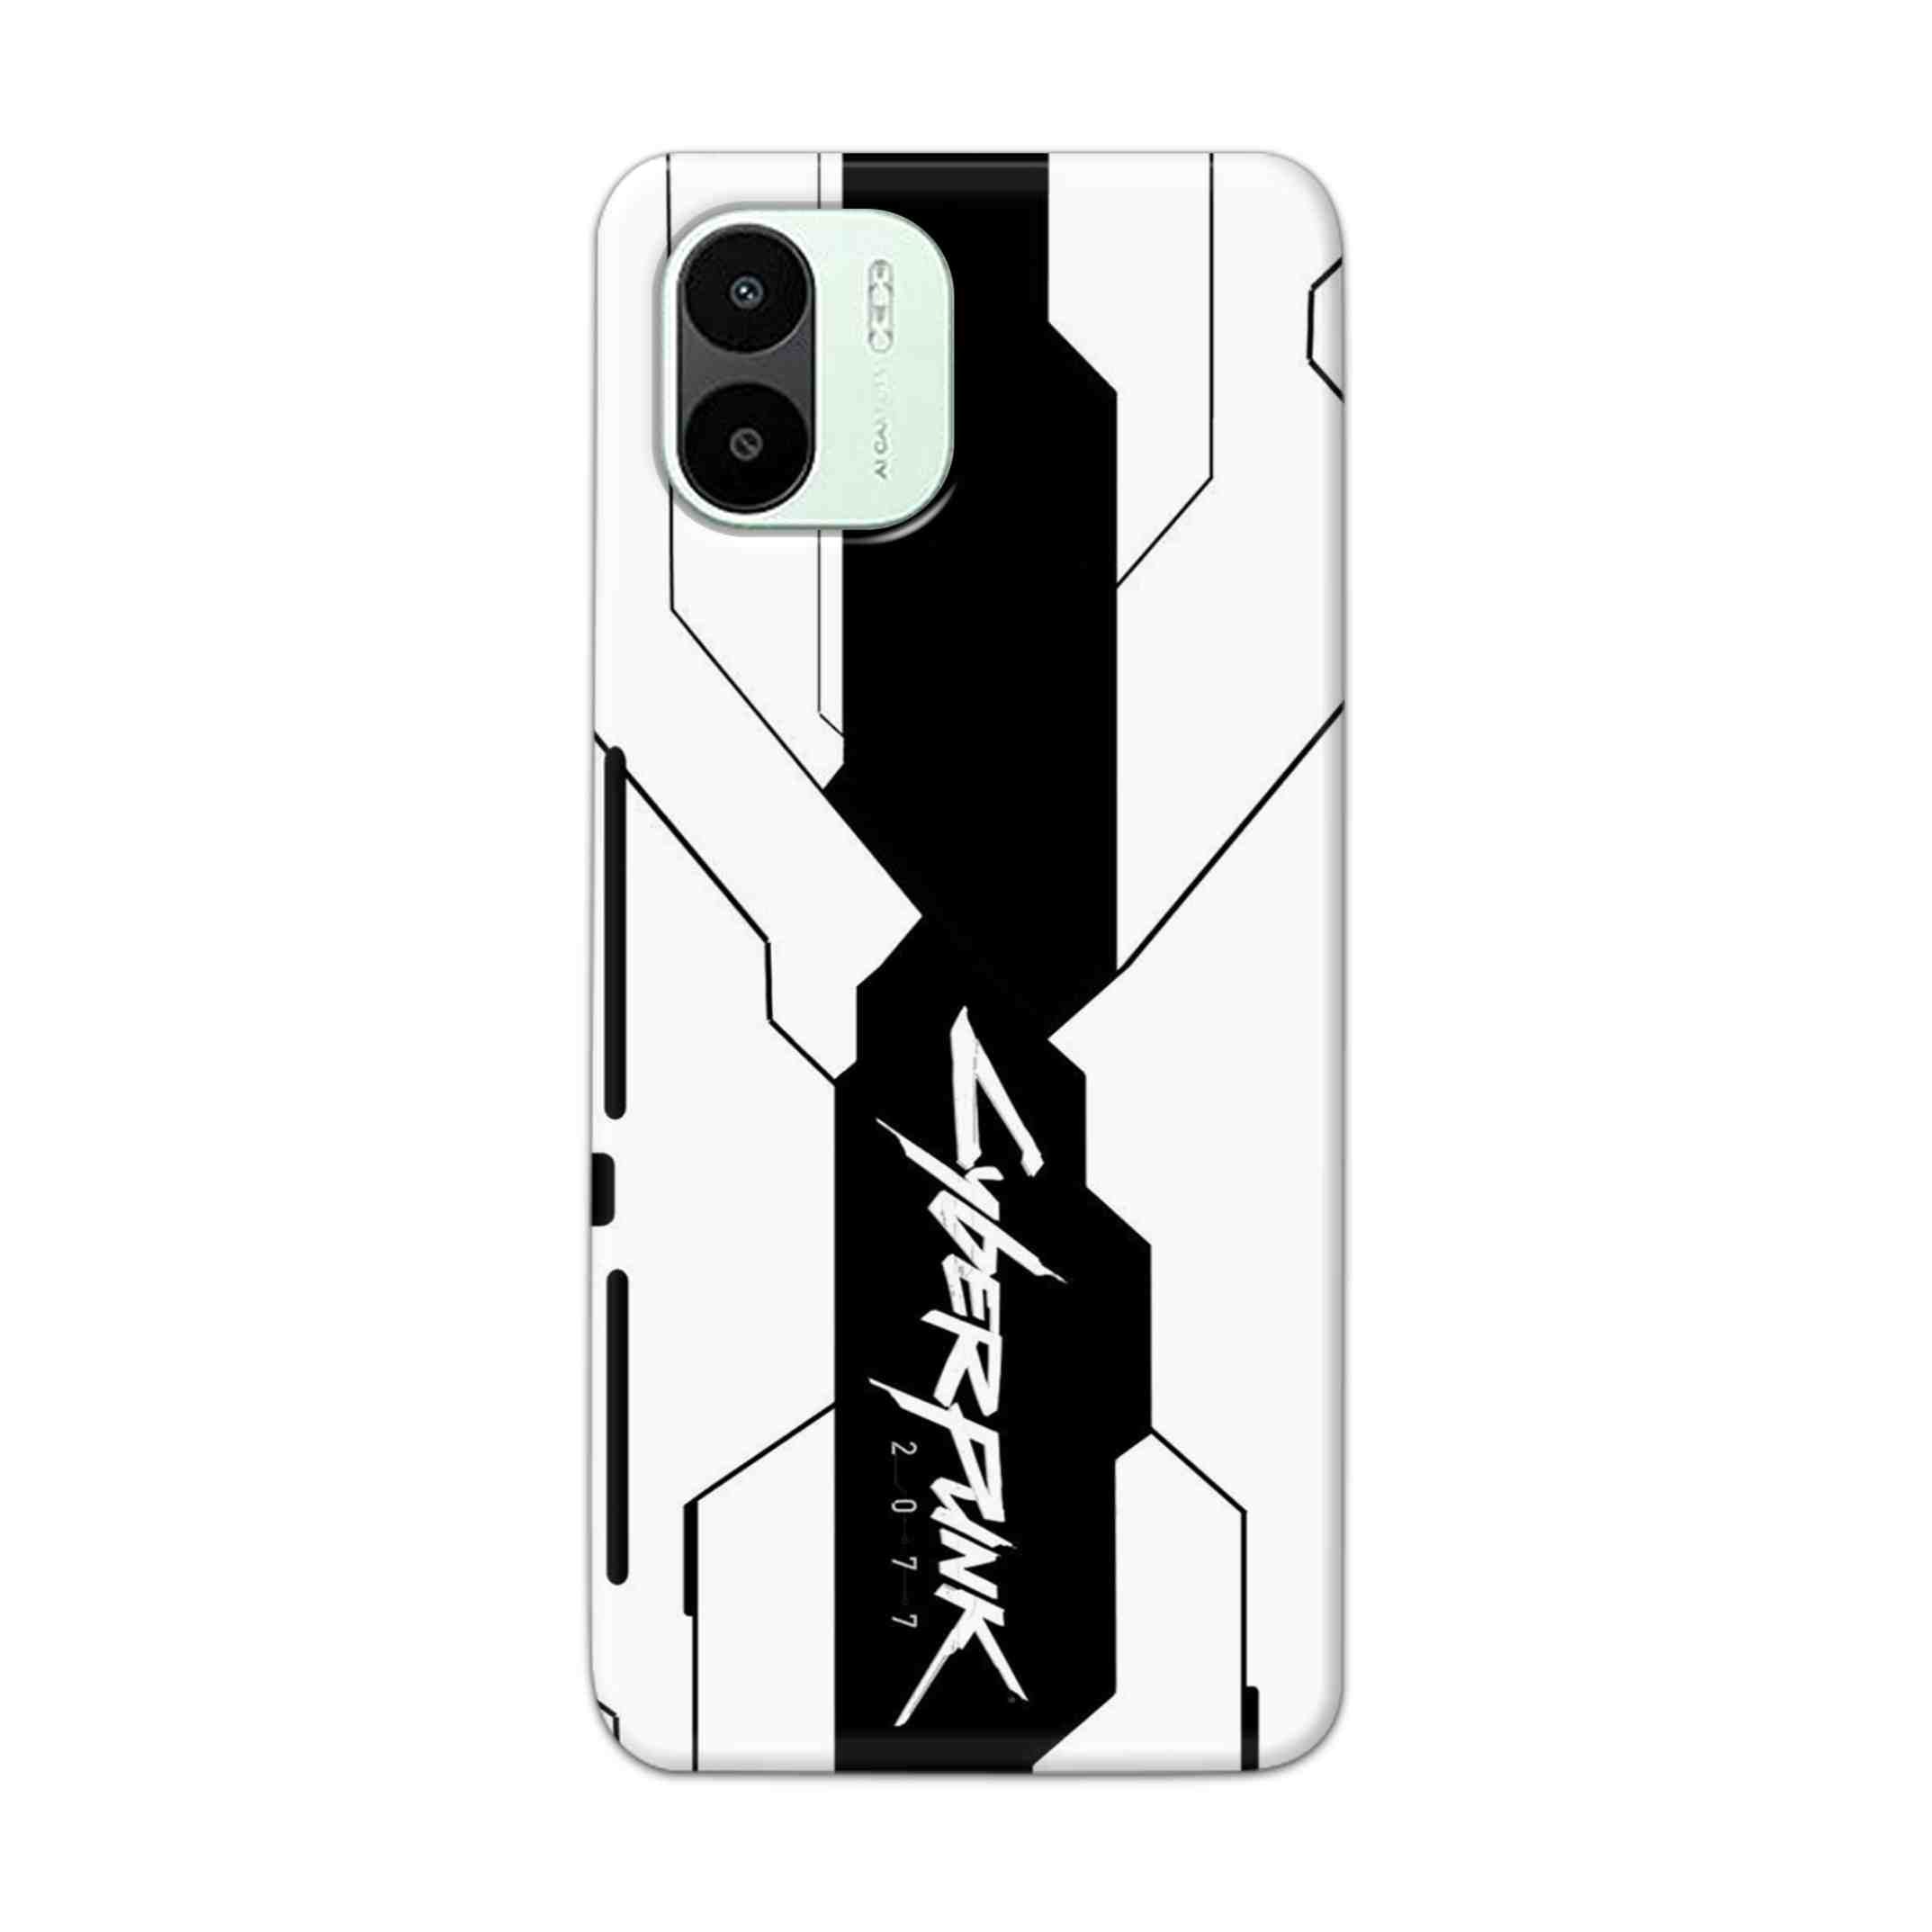 Buy Cyberpunk 2077 Hard Back Mobile Phone Case Cover For Xiaomi Redmi A1 5G Online